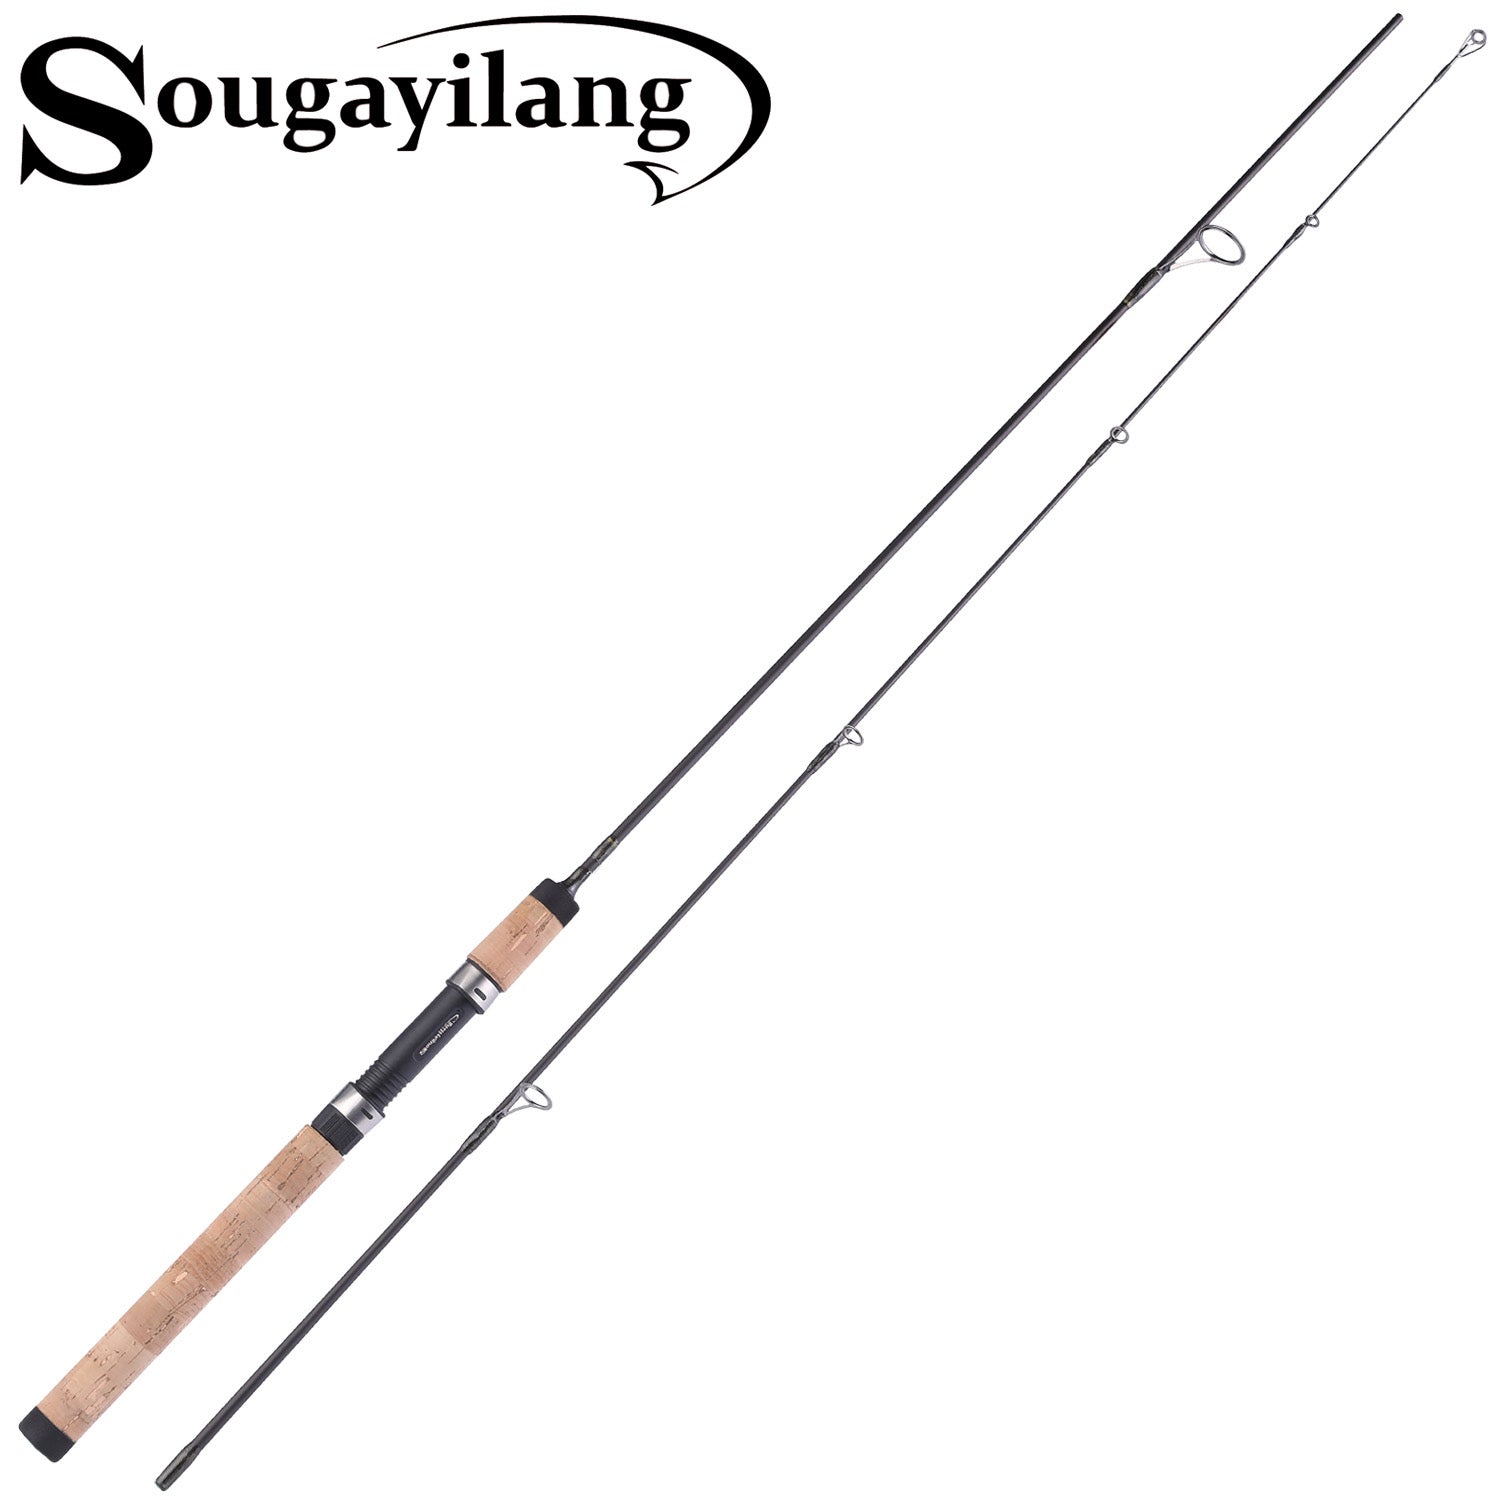 Sougayilang 2 Pieces Surf Rod - Big Game Spinning/Casting Fishing Rod